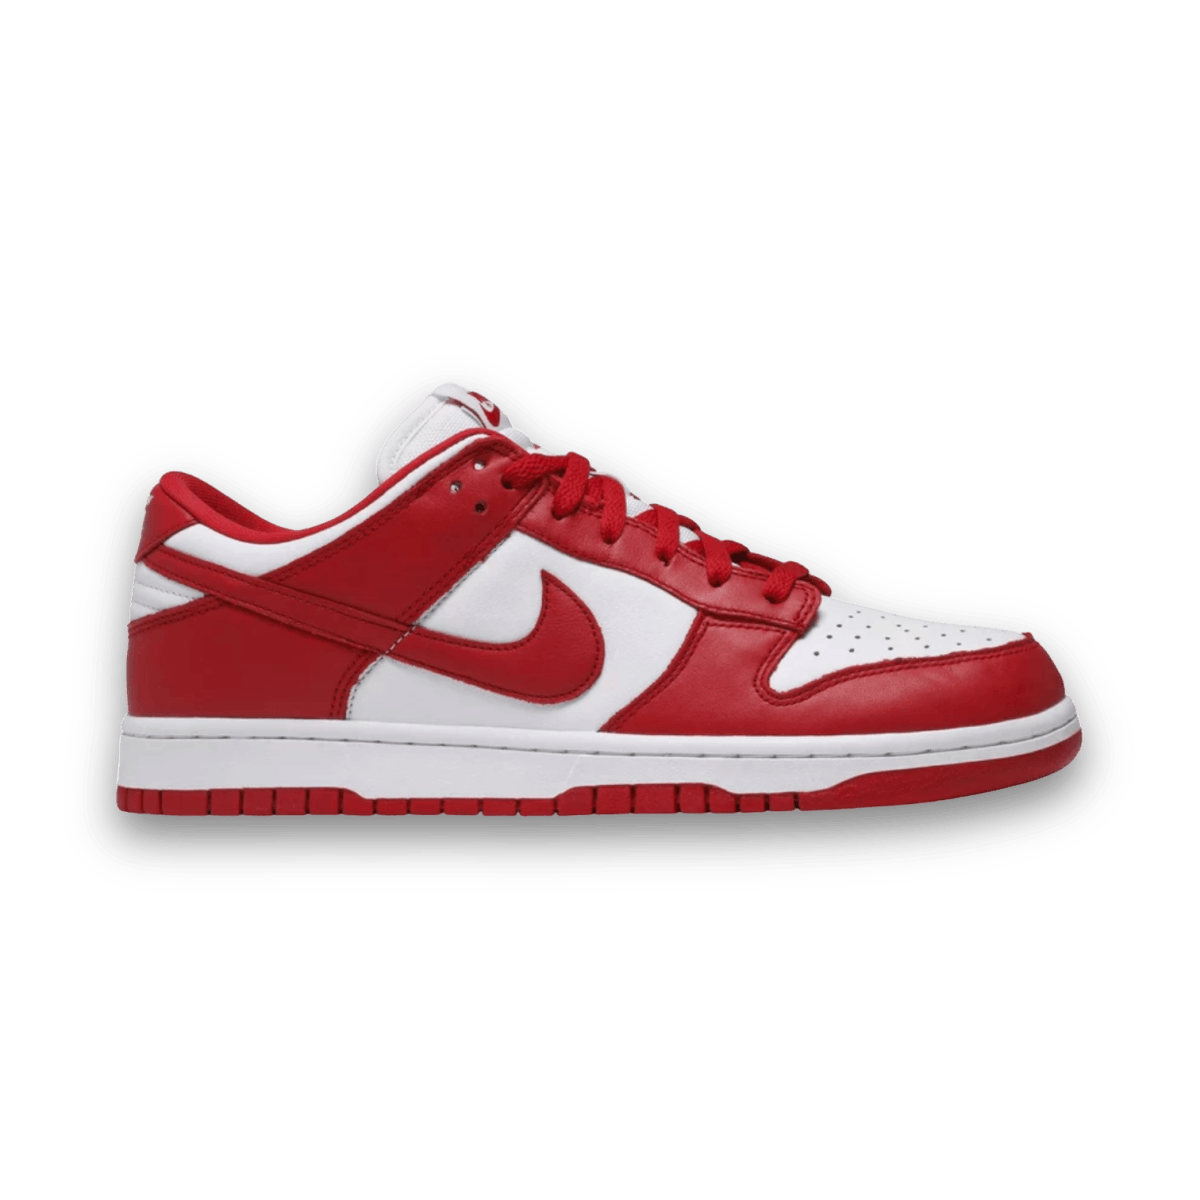 Dunk Low Retro SP 'St Johns' Red - Low Sneaker - Dunks - Jawns on Fire - sneakers